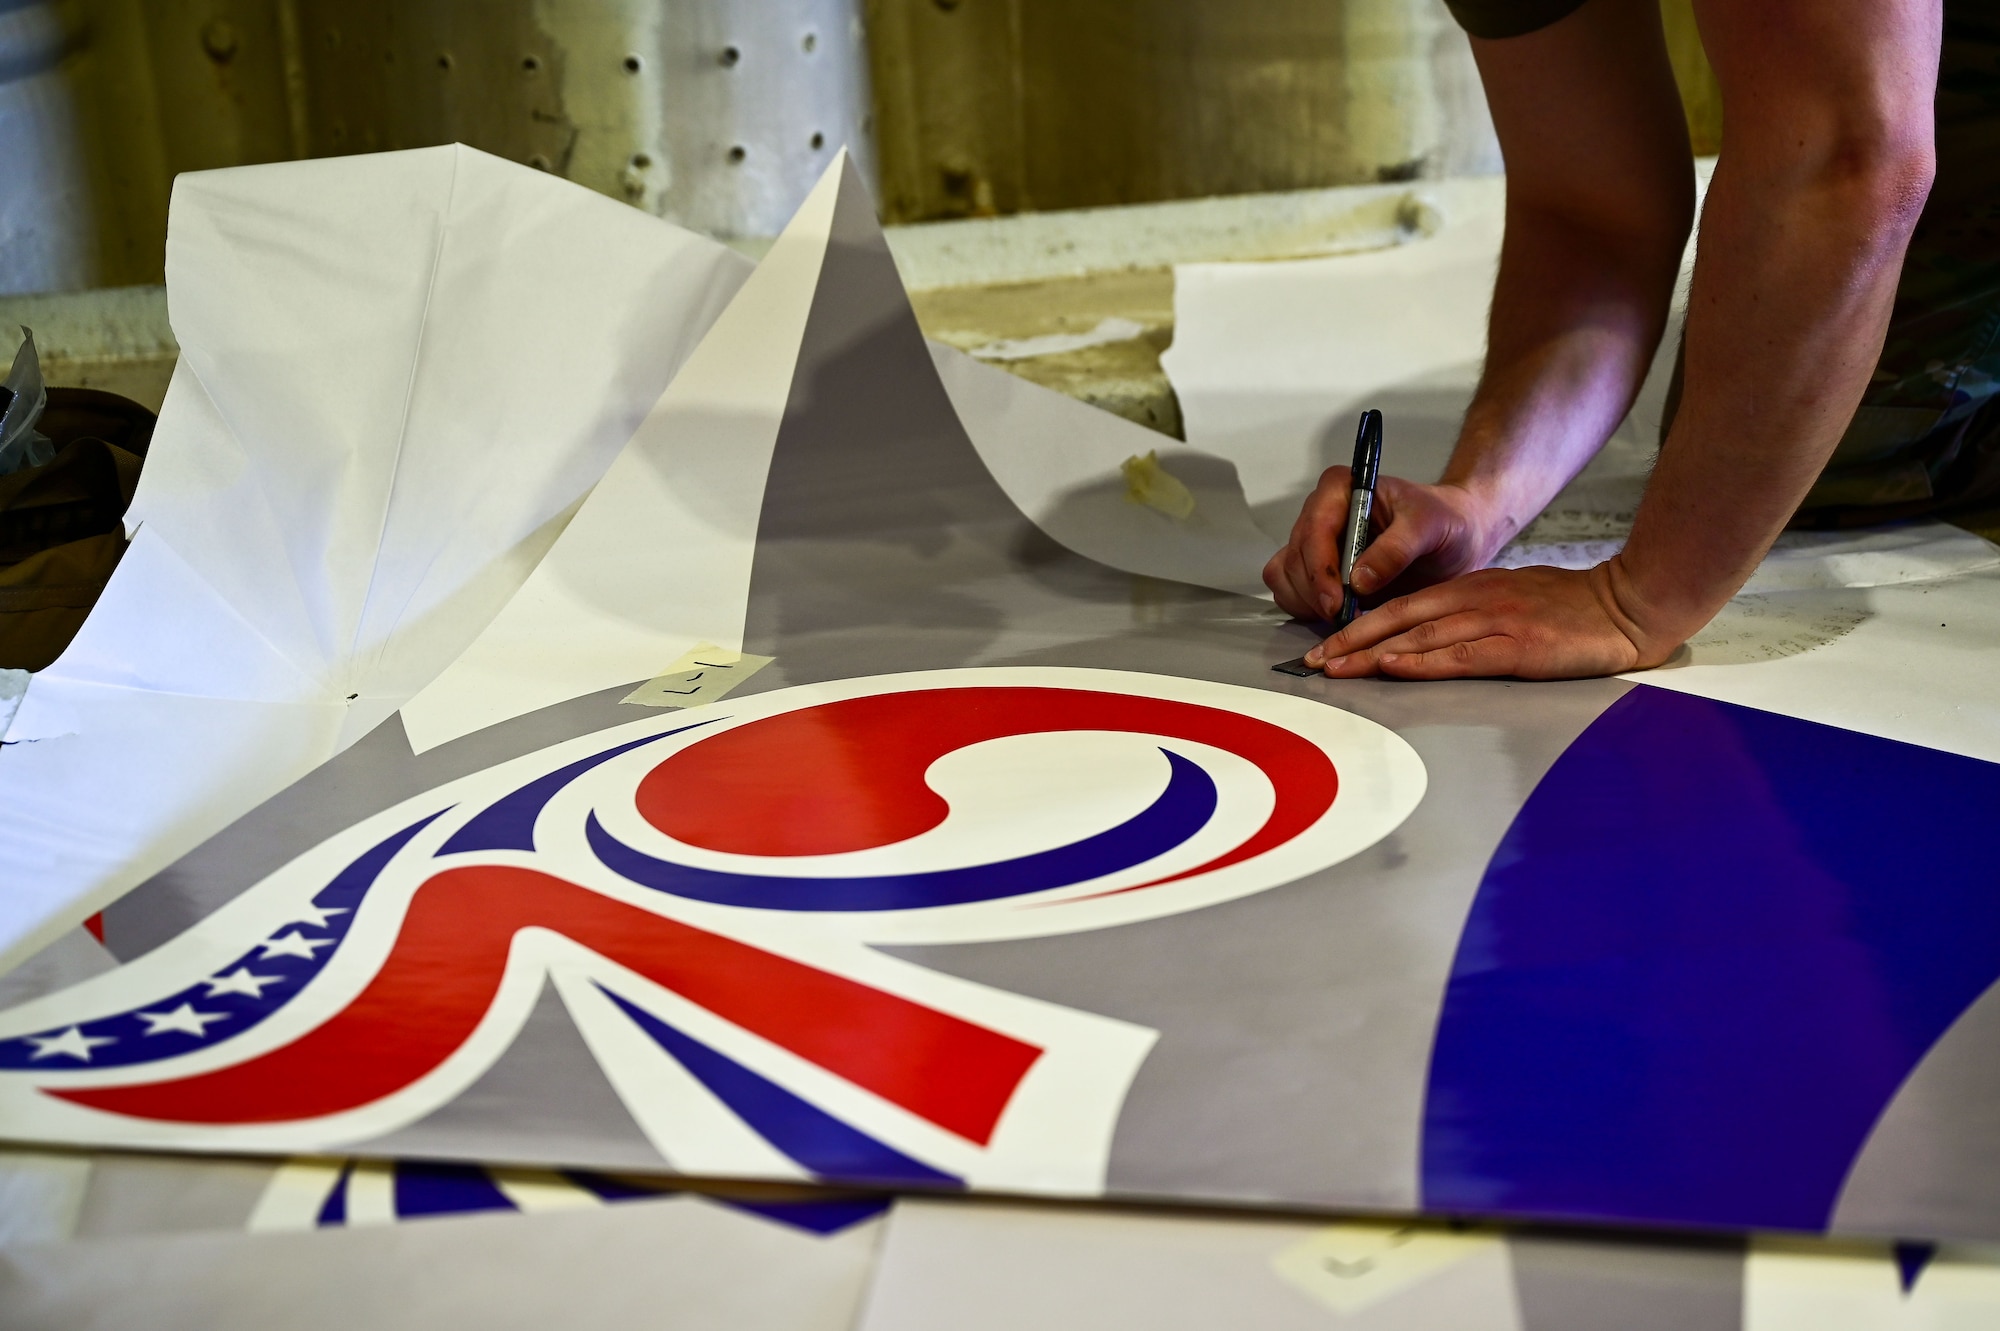 Staff Sgt. Matthew Campbell, 8th Maintenance Squadron aircraft structural maintenance craftsman, measures and marks a 70th anniversary heritage tail flash decal at Osan Air Base, Republic of Korea, May 1, 2023. Each piece of the decal must be measured, marked and cut to properly fit the tail of the F-16 Fighting Falcon. (U.S. Air Force photo by Tech. Sgt. Timothy Dischinat)